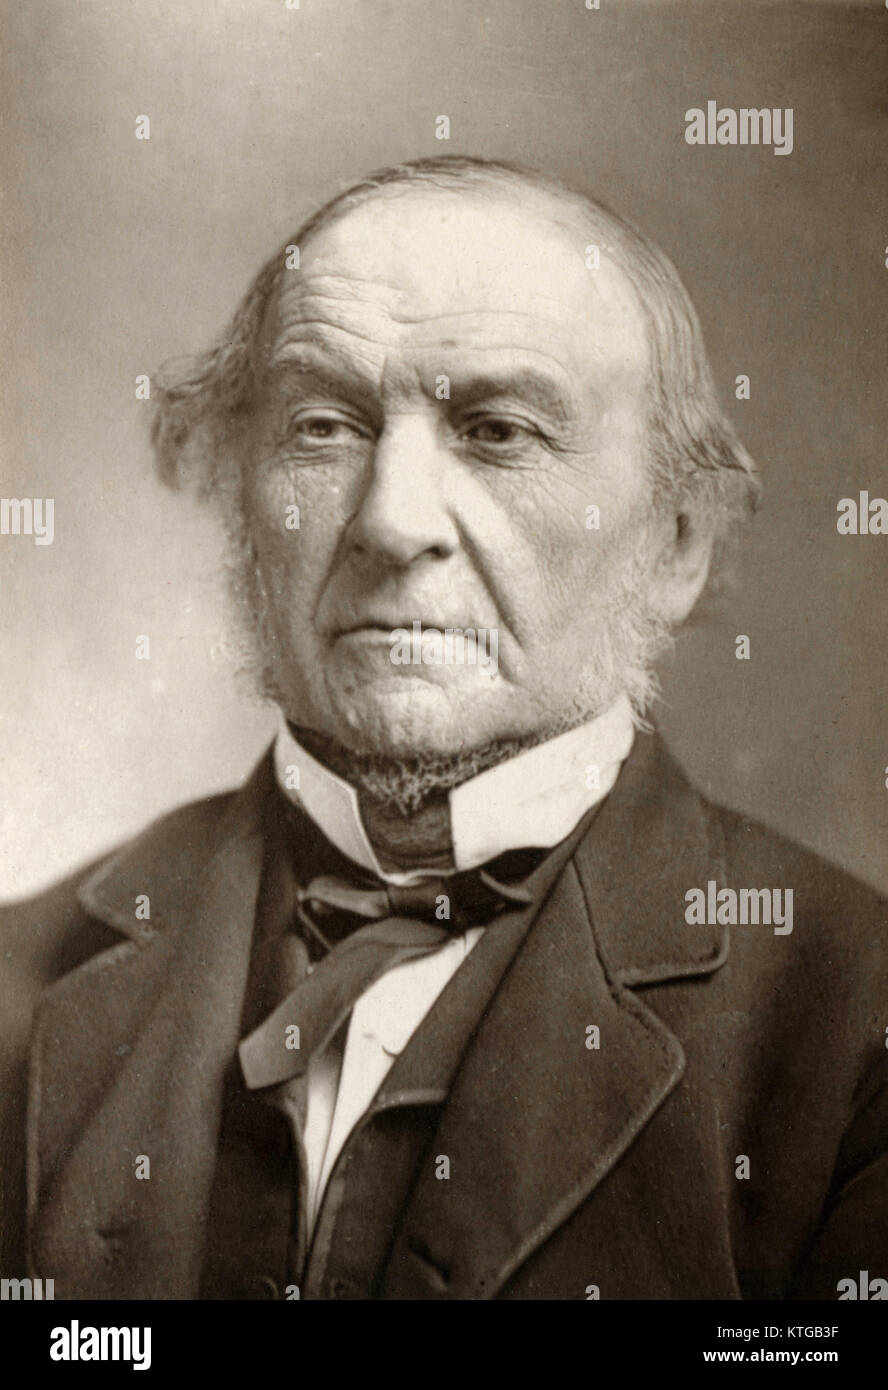 Portrait of William Ewart Gladstone, former Liberal Prime Minister of Great Britain 1868 to 1894 Stock Photo